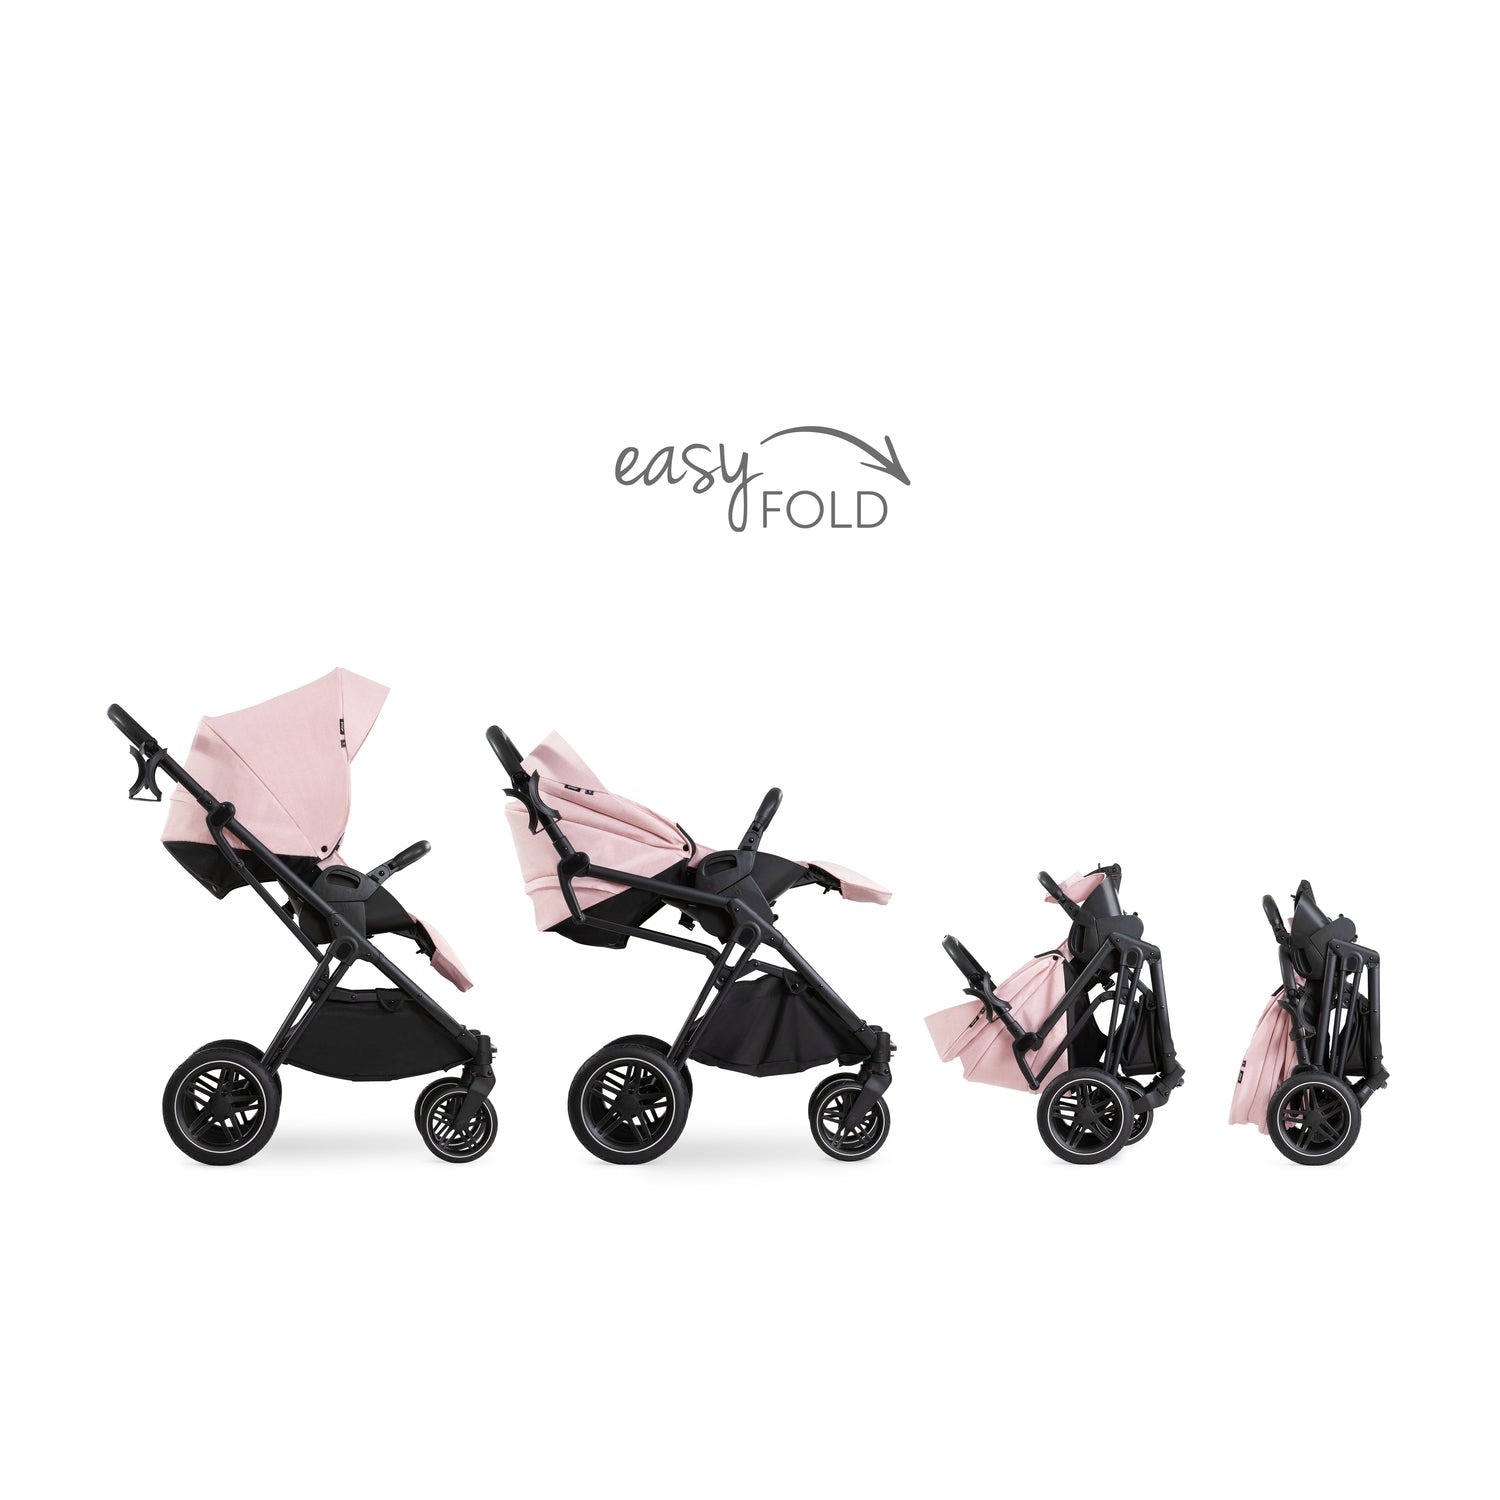 Hauck Vision X Stroller: All-Terrain, Travel System, Reversible (Free Infant Car Seat & Isofix Base)